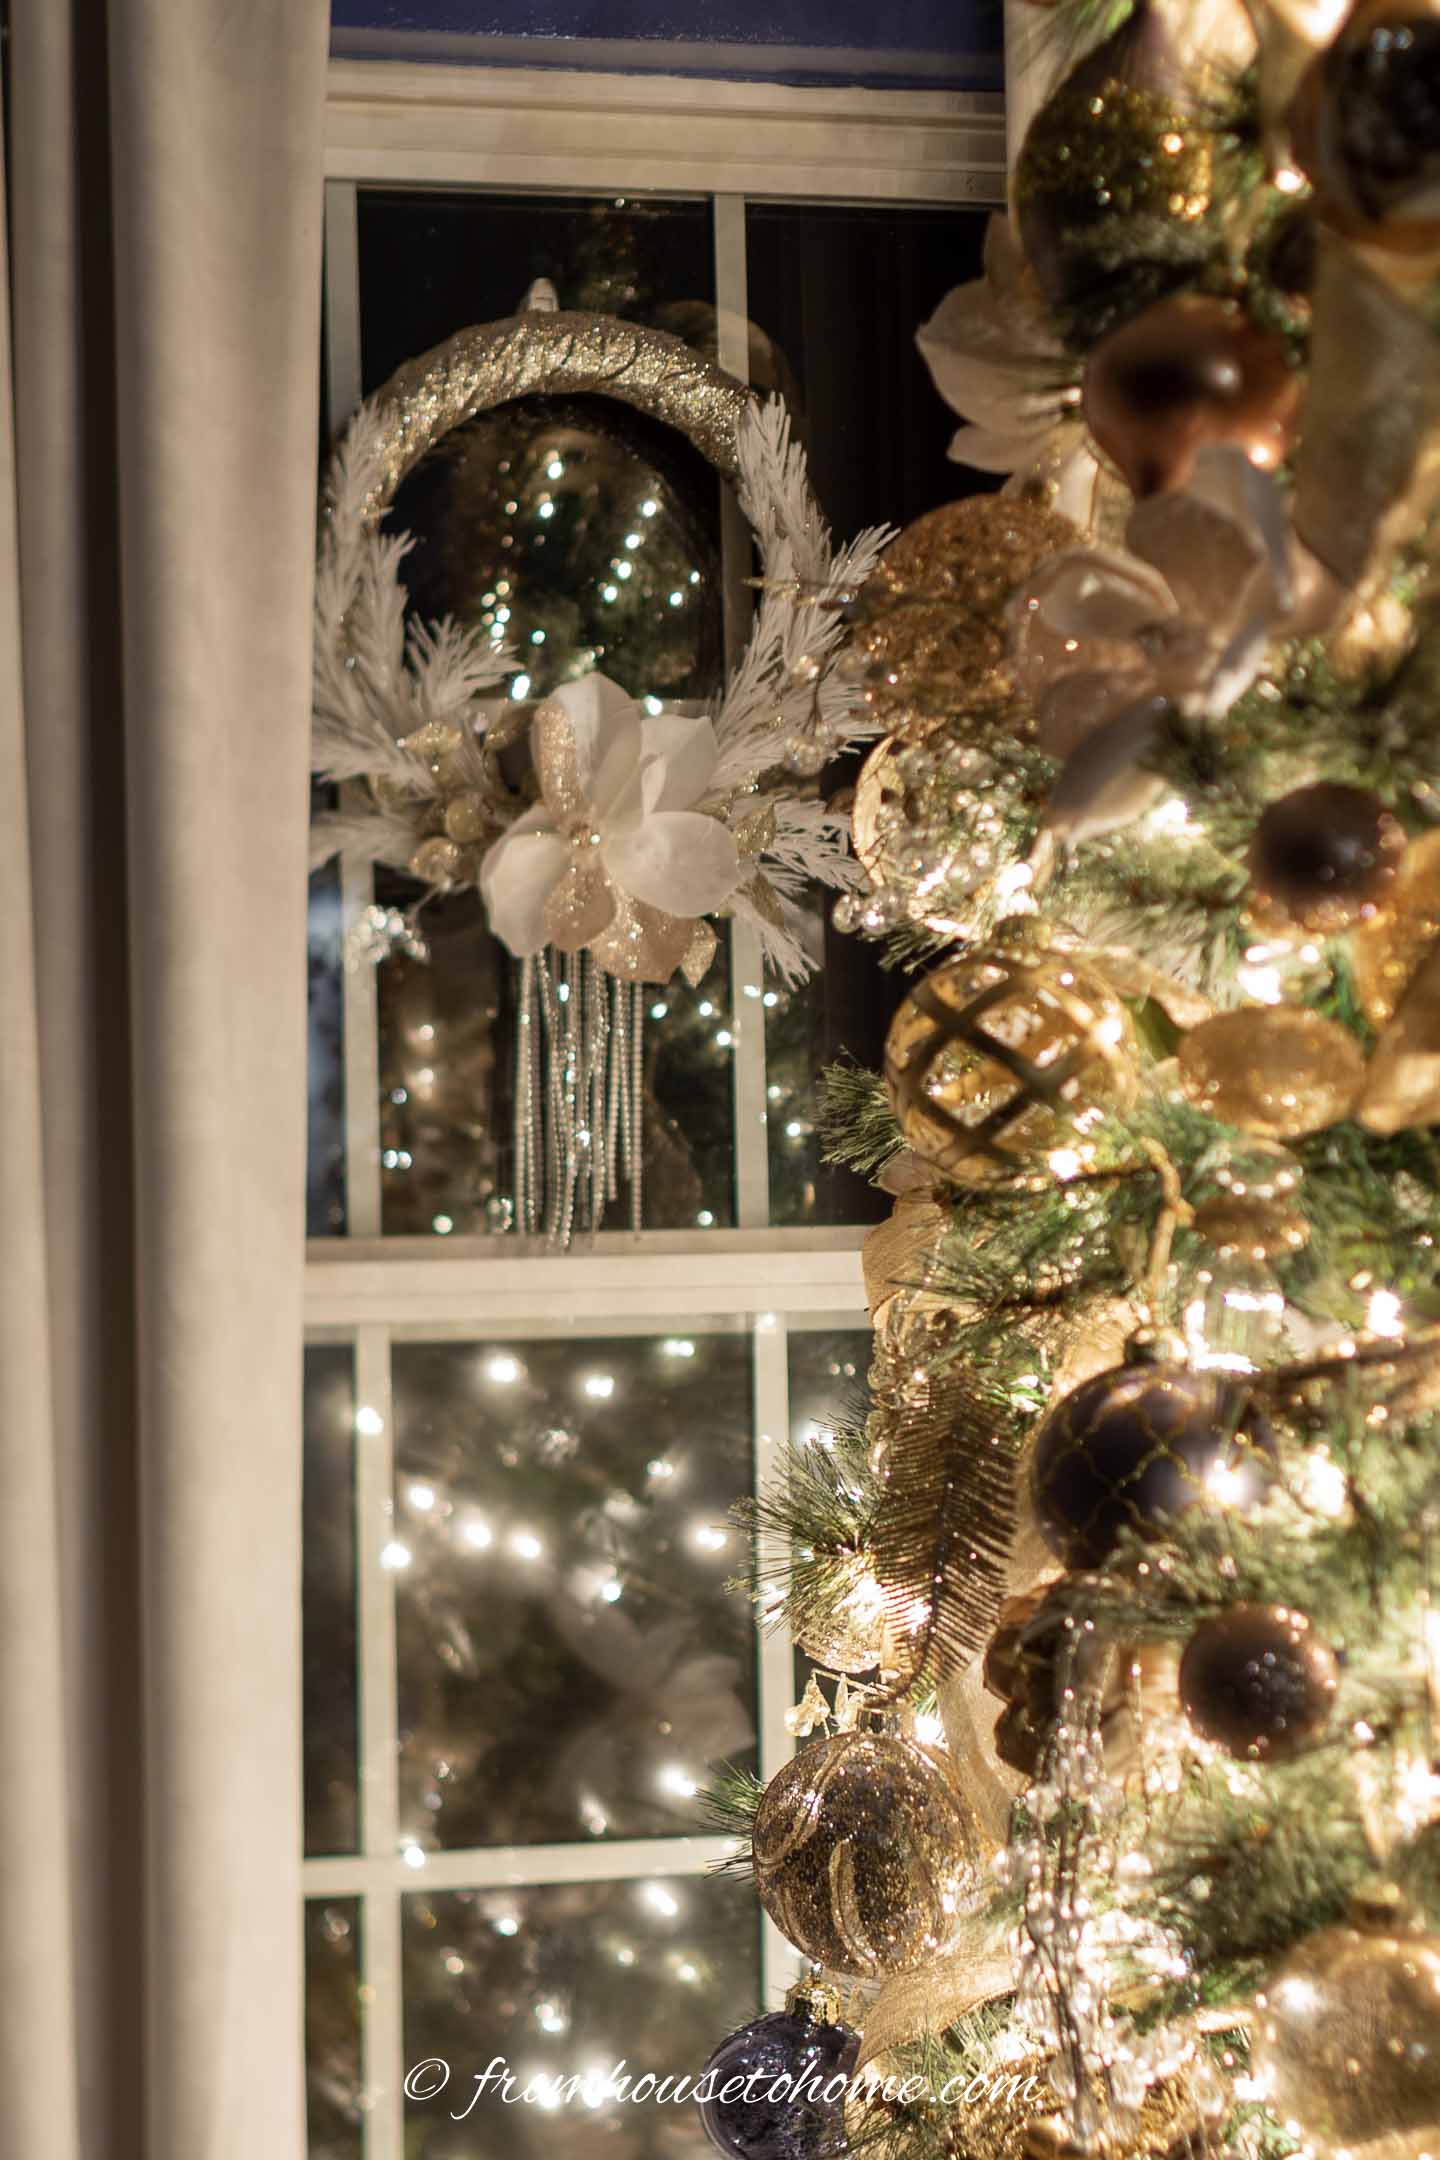 Gold and white wreath hung in the window behind the Christmas tree